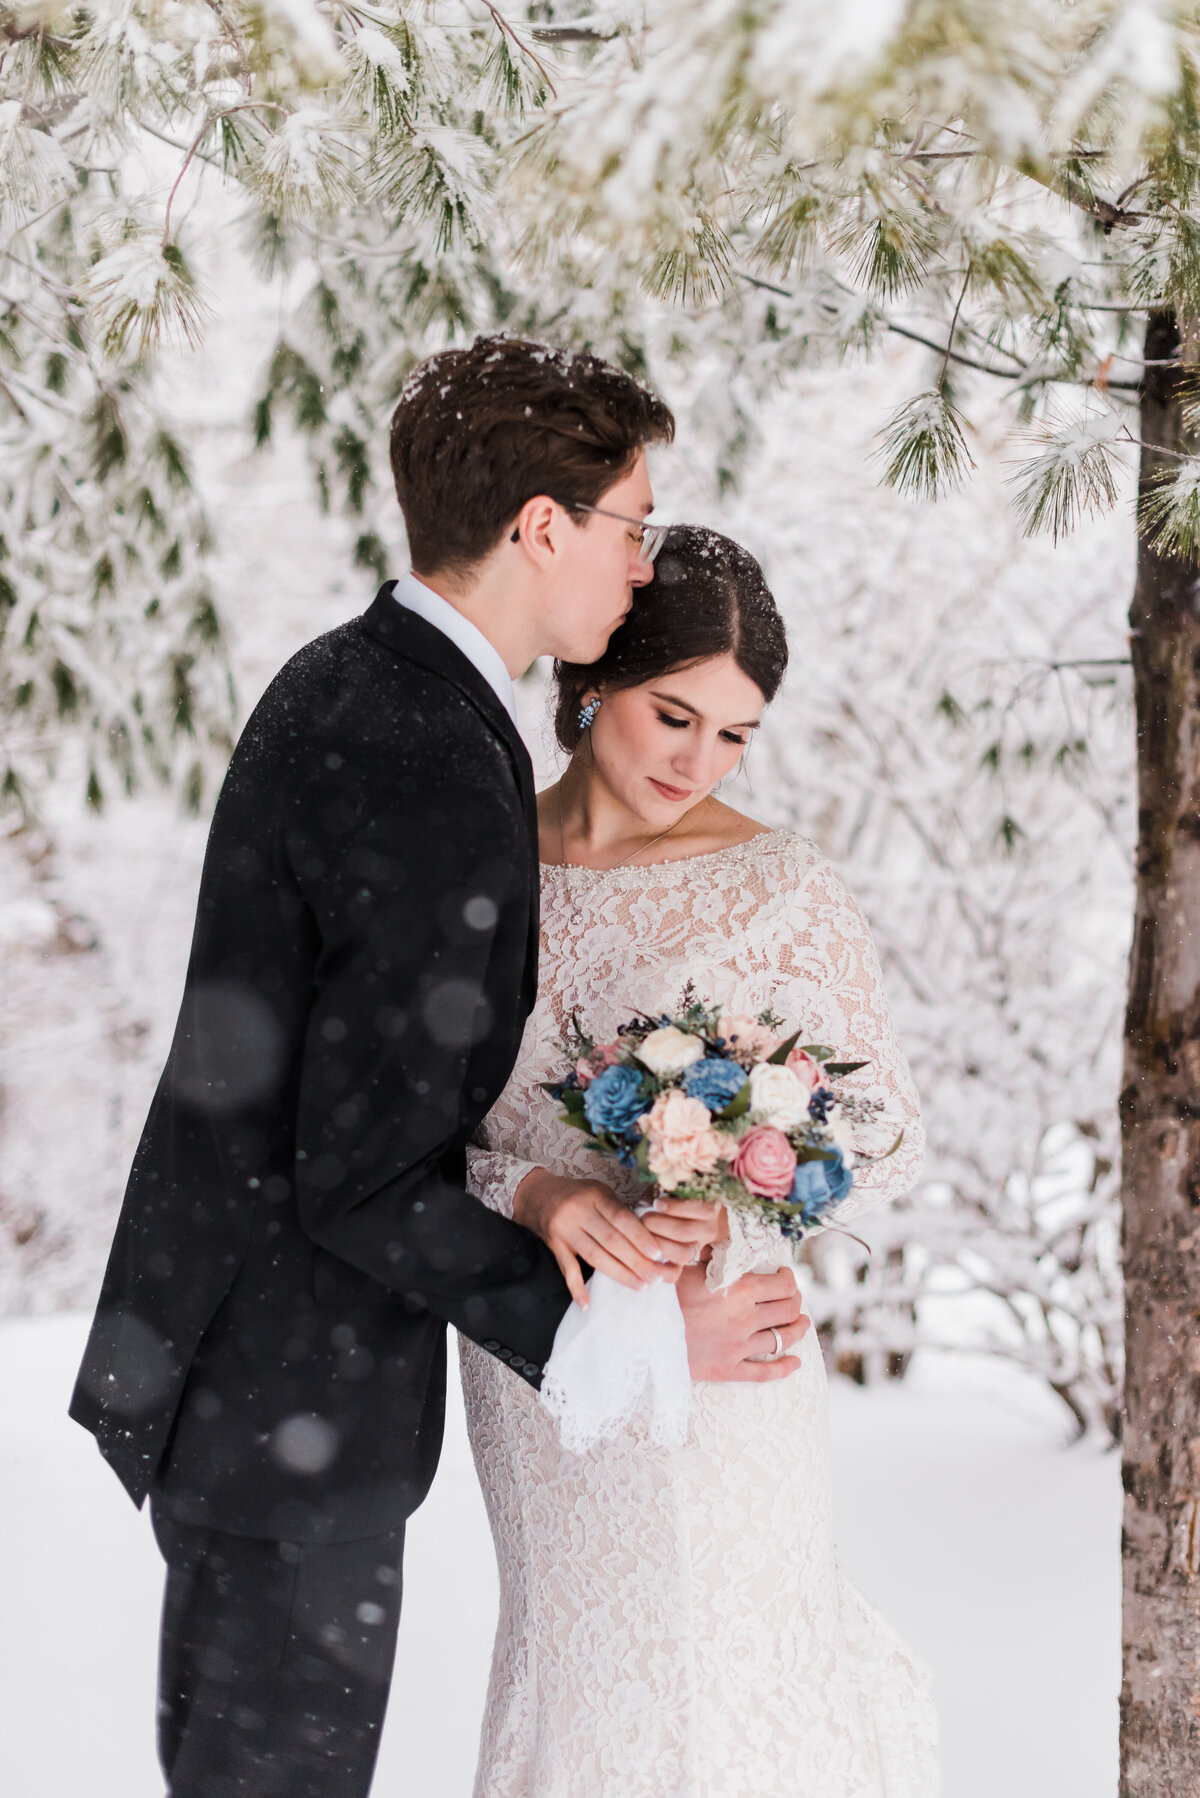 winter colorado wedding with bride and groom embracing under a snowy tree as the bride holds a blue and pink bouquet and her groom kisses her on the head